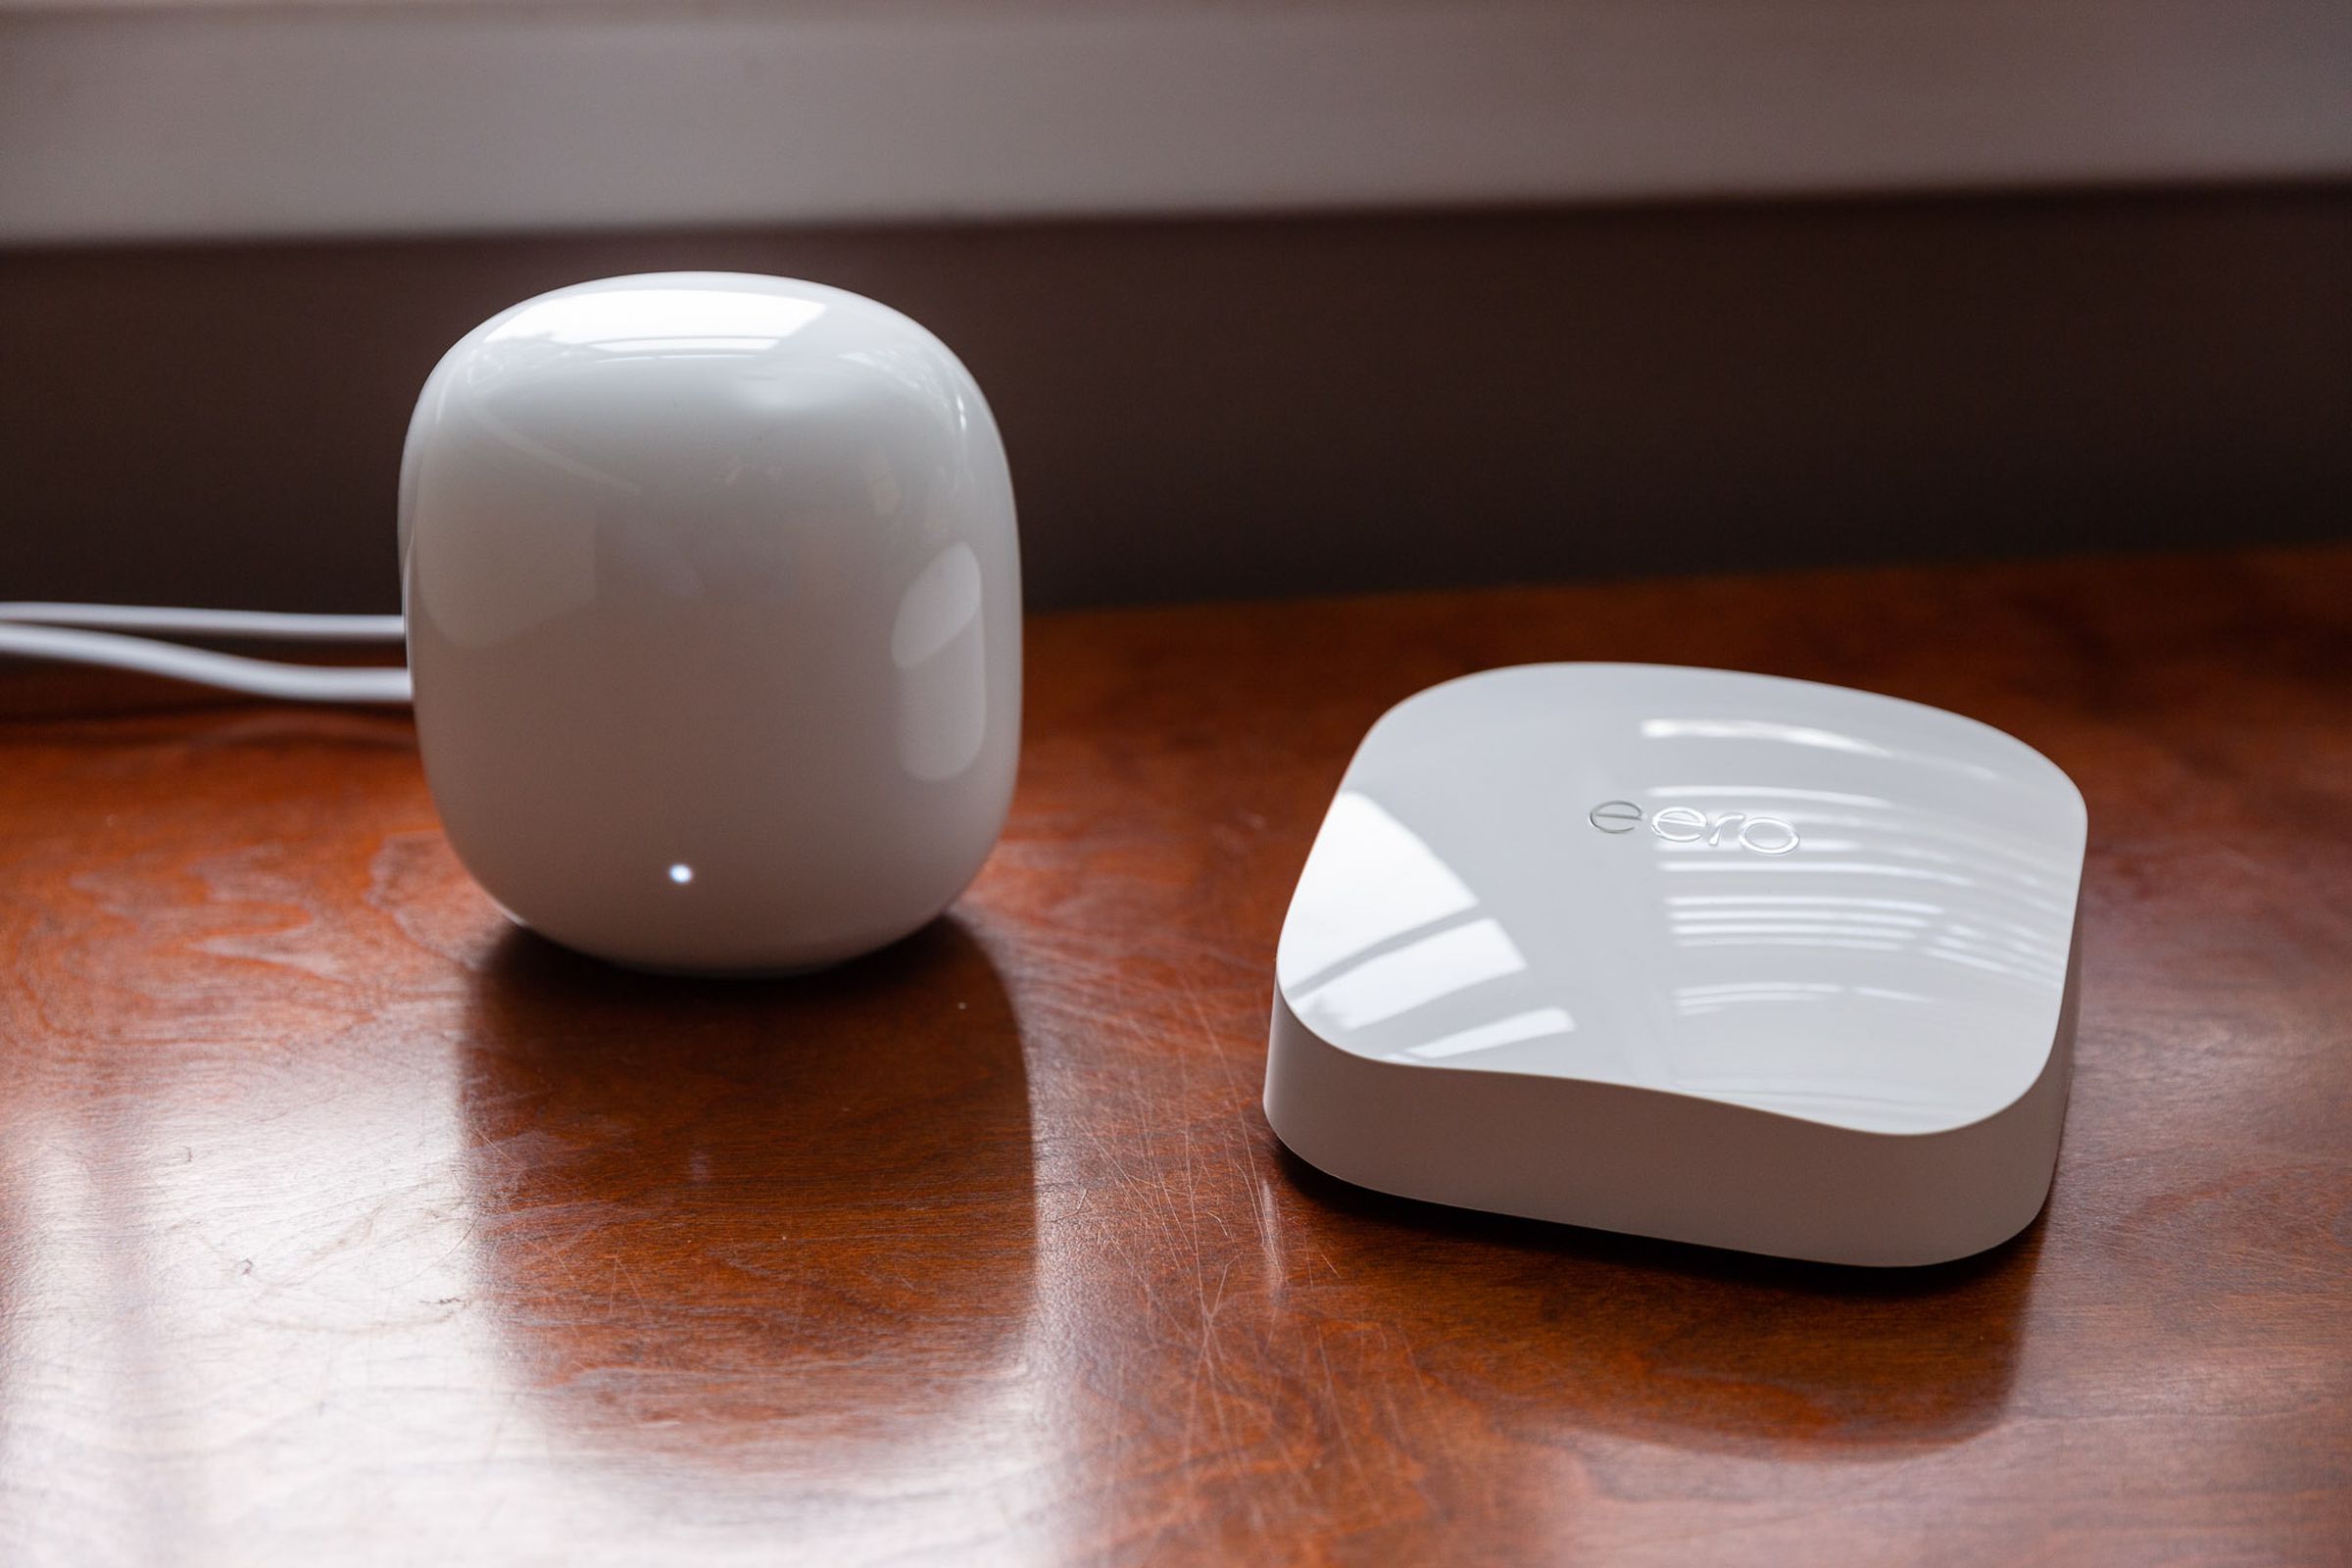 Nest Wifi Pro router on a table next to an Eero router.